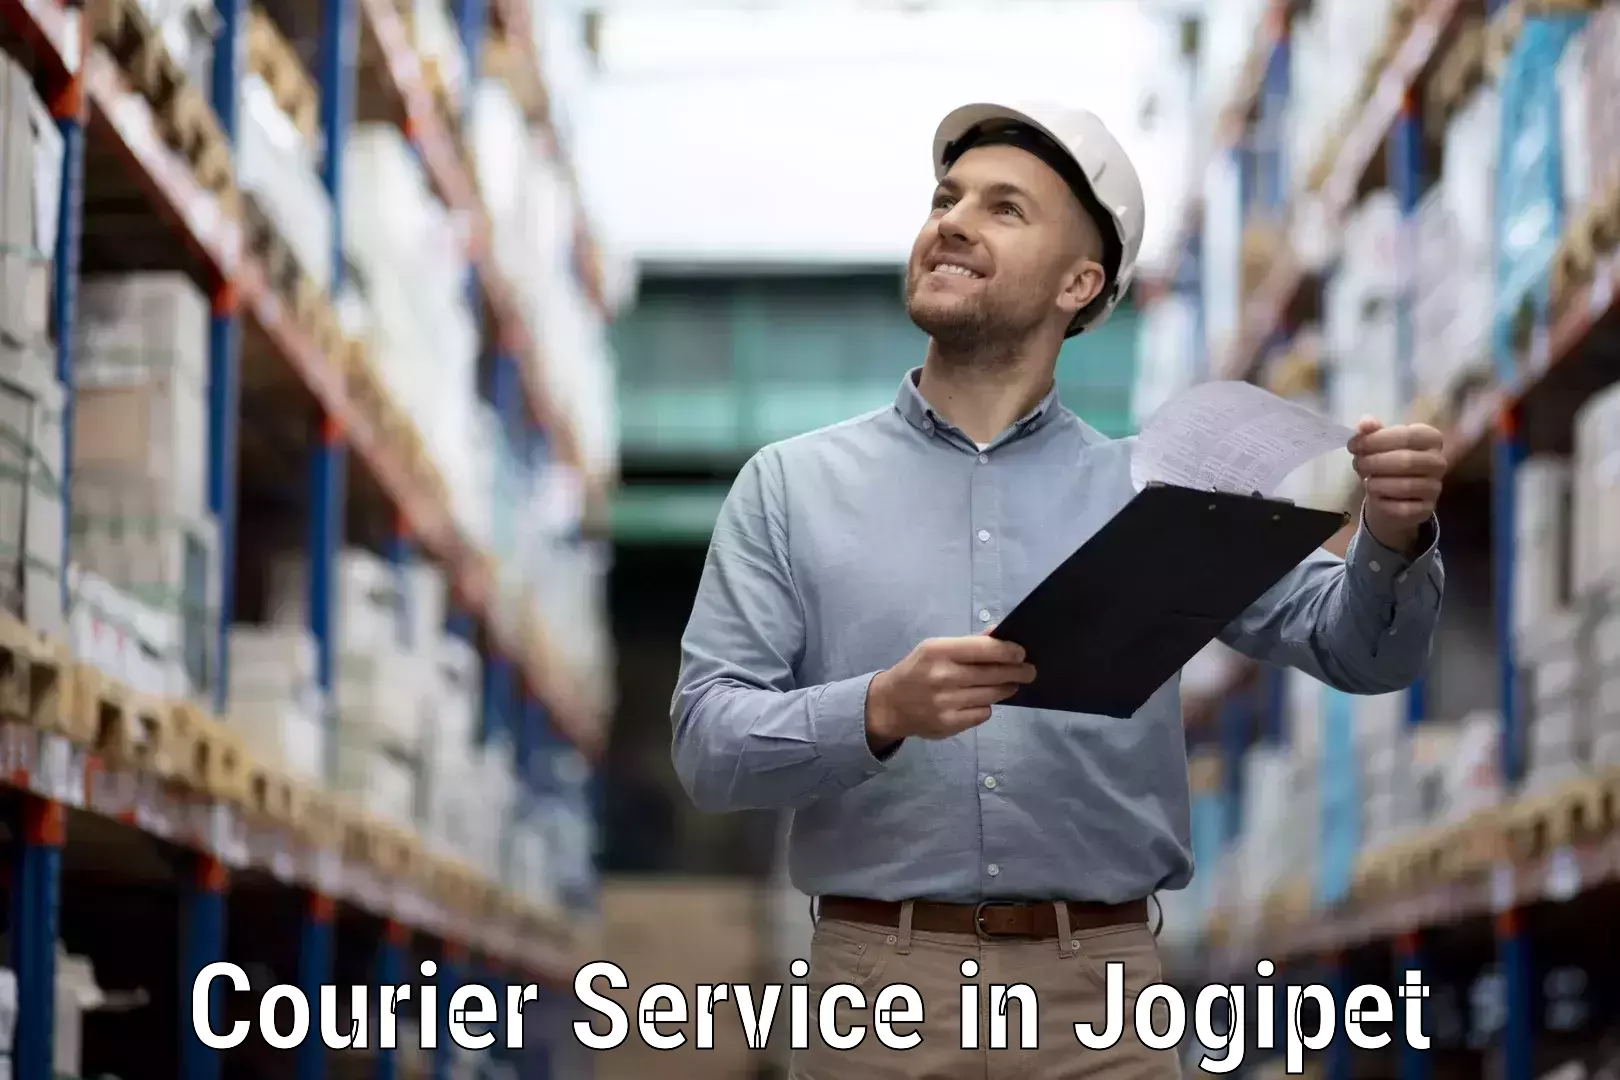 Customer-centric shipping in Jogipet